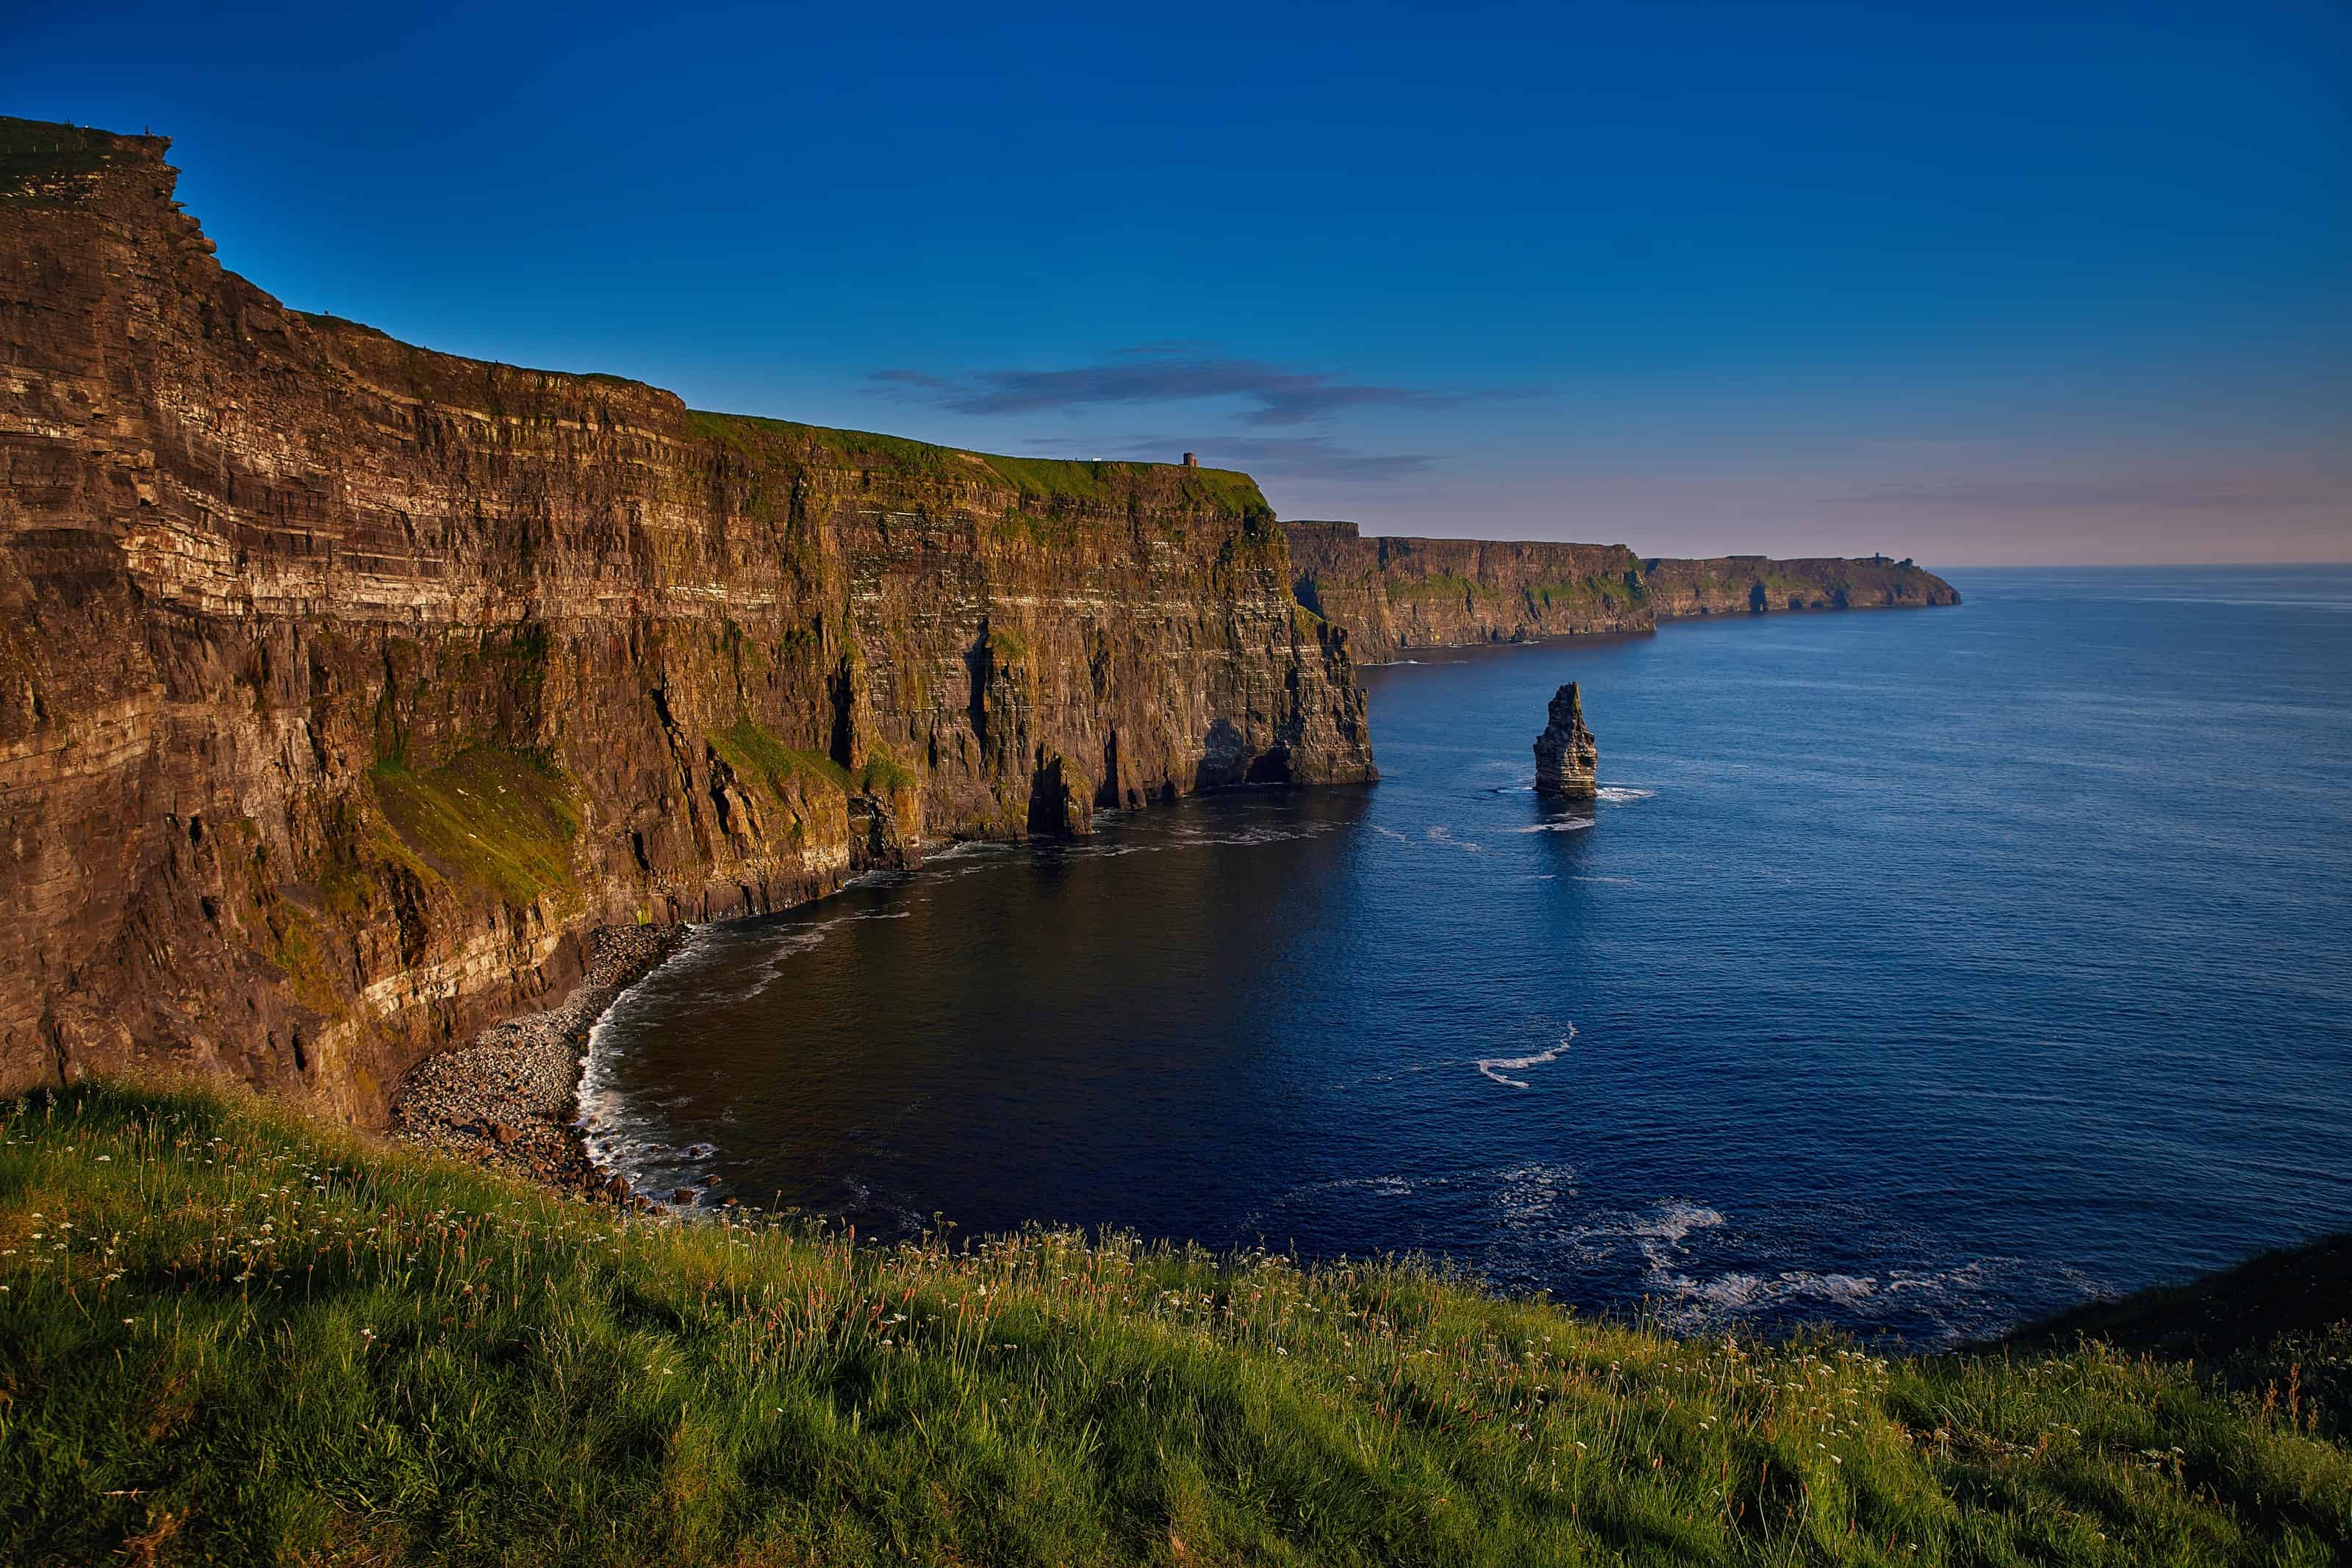 The Perfect Ireland Road Trip Itinerary You Should Steal Follow Me Away